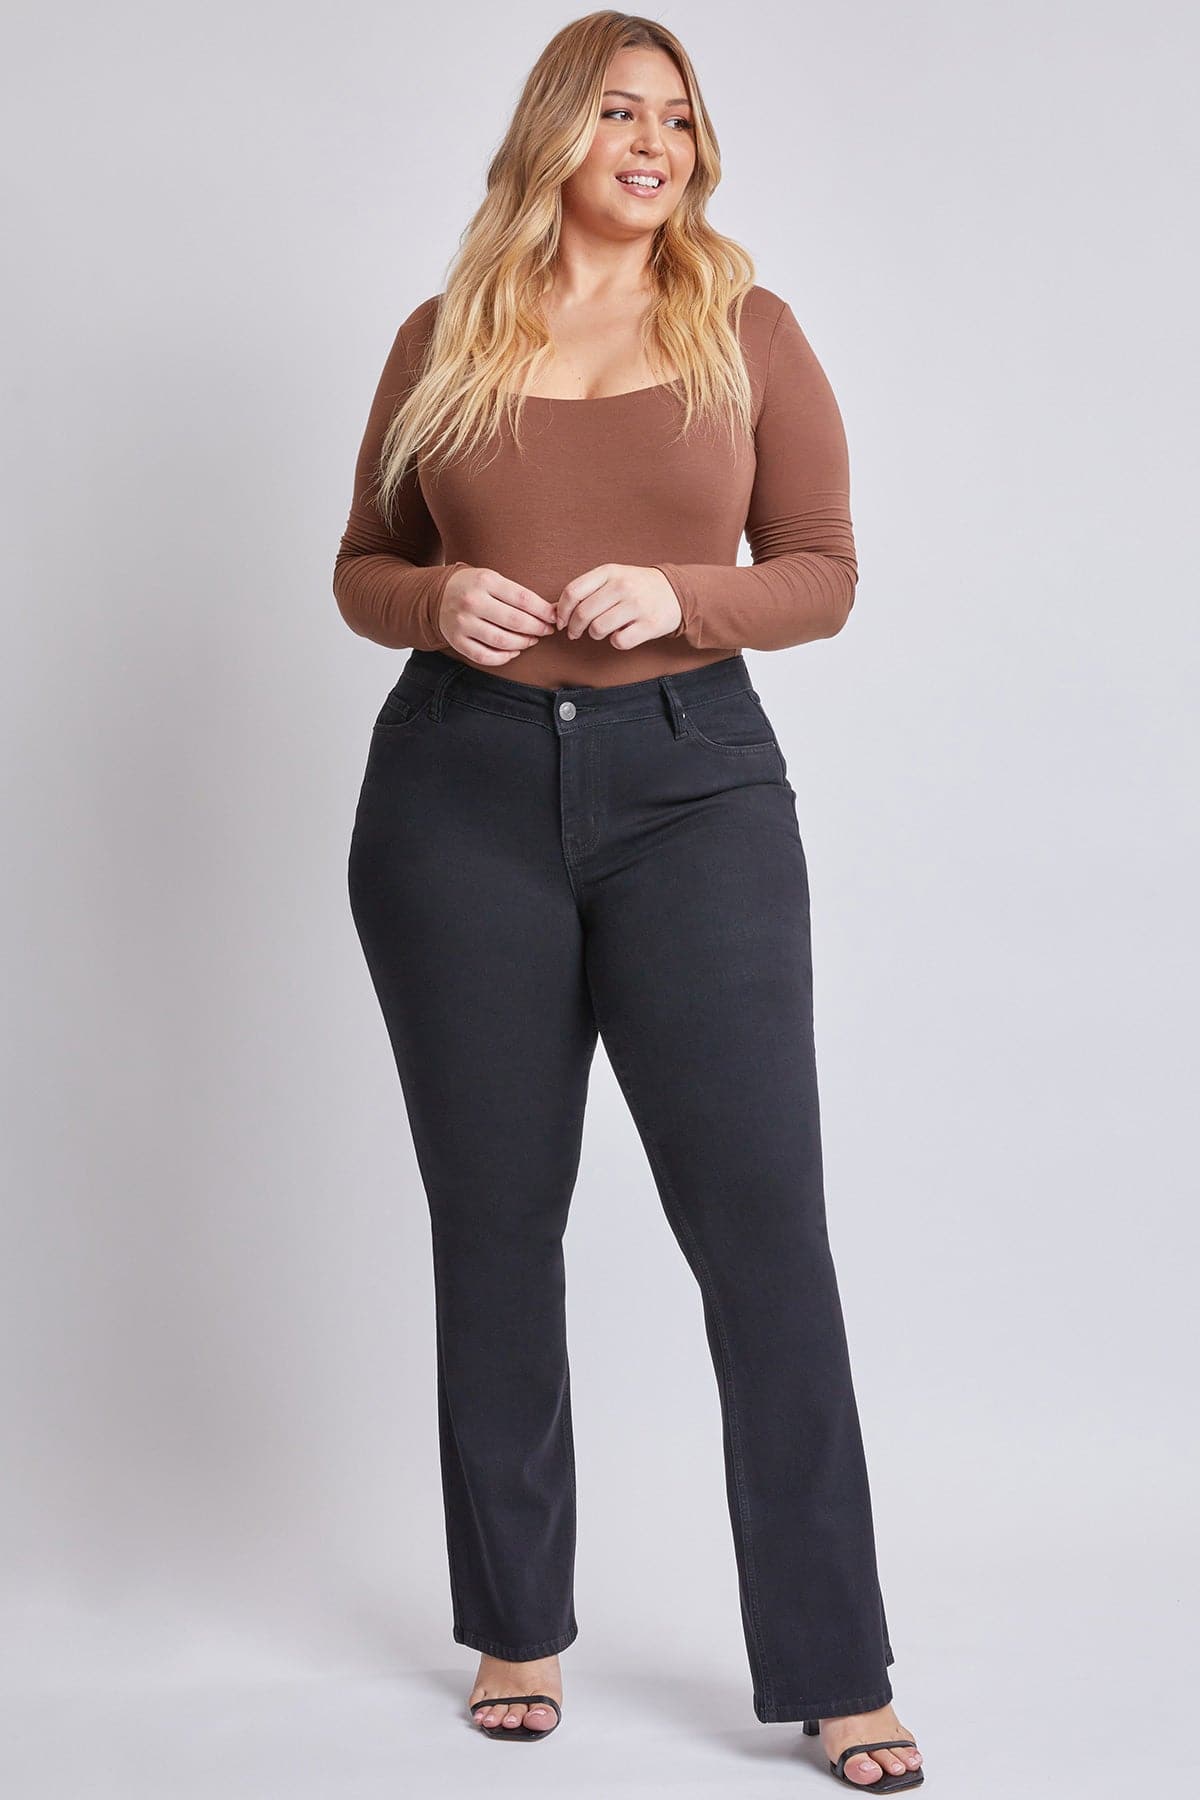 Women’s Plus Size Sustainable Mid Rise Boot Cut Jeans